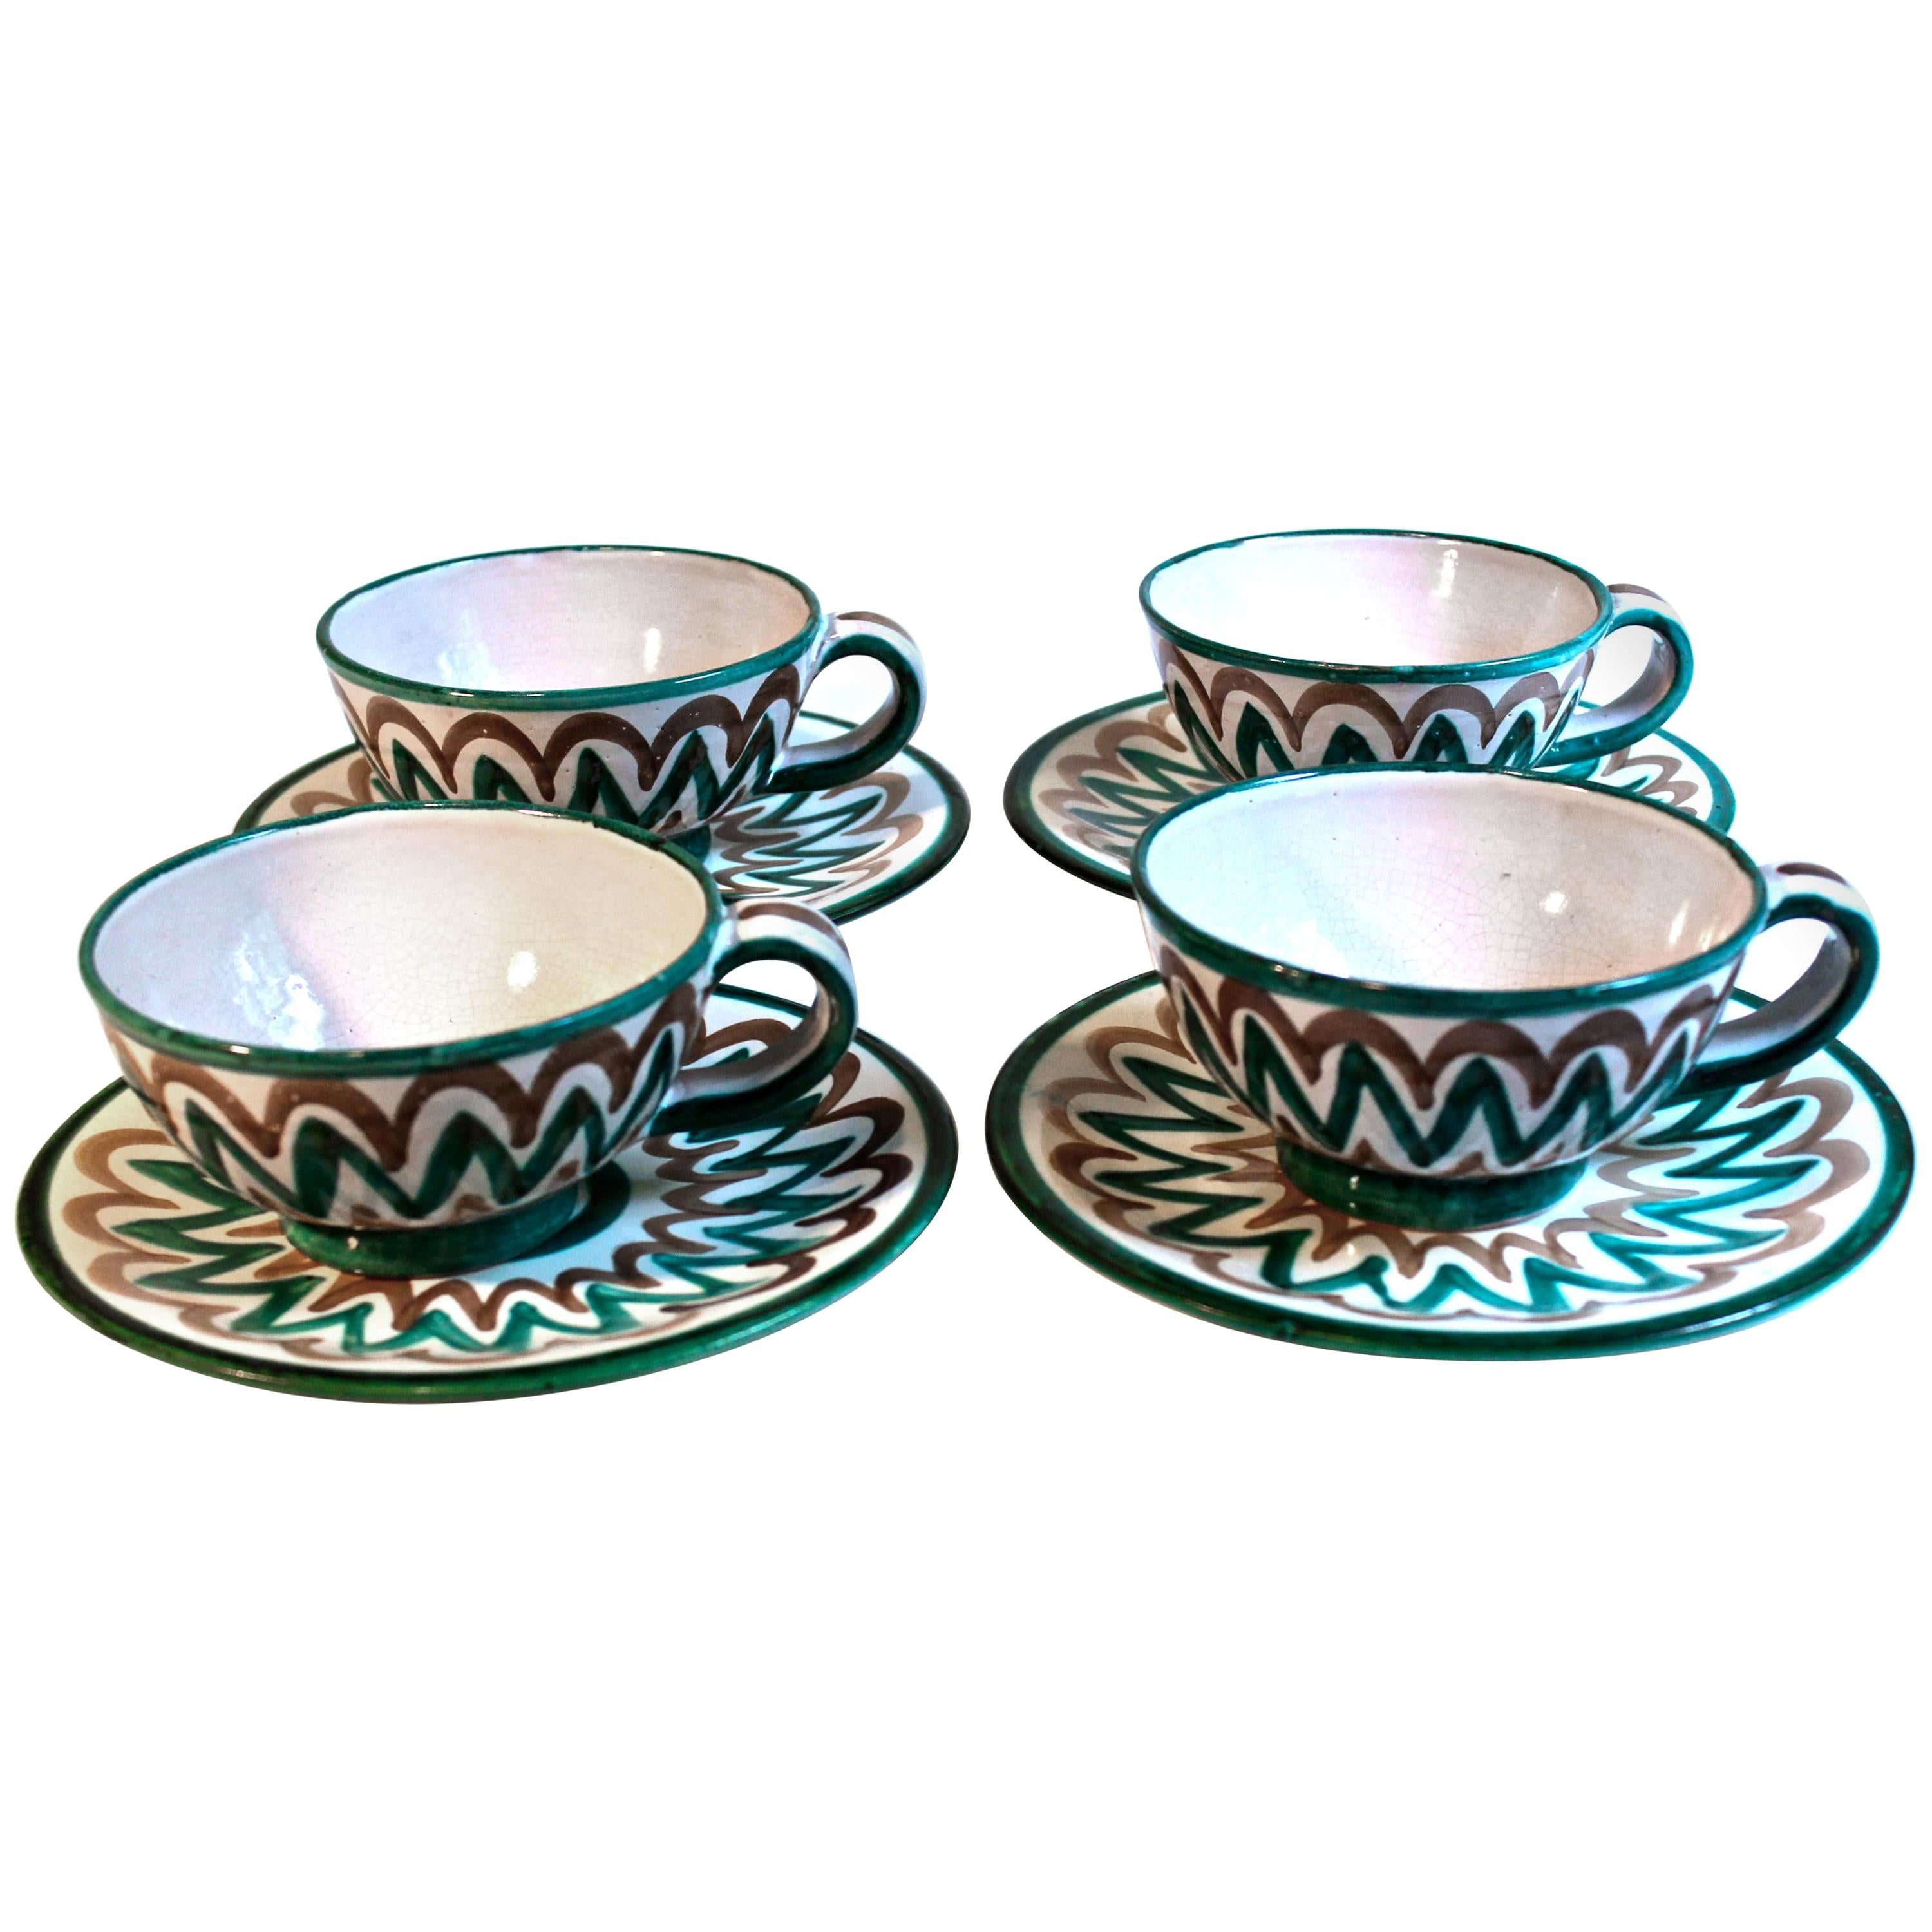 Roger Picault Vaulluris Hand-Painted Cups and Saucers